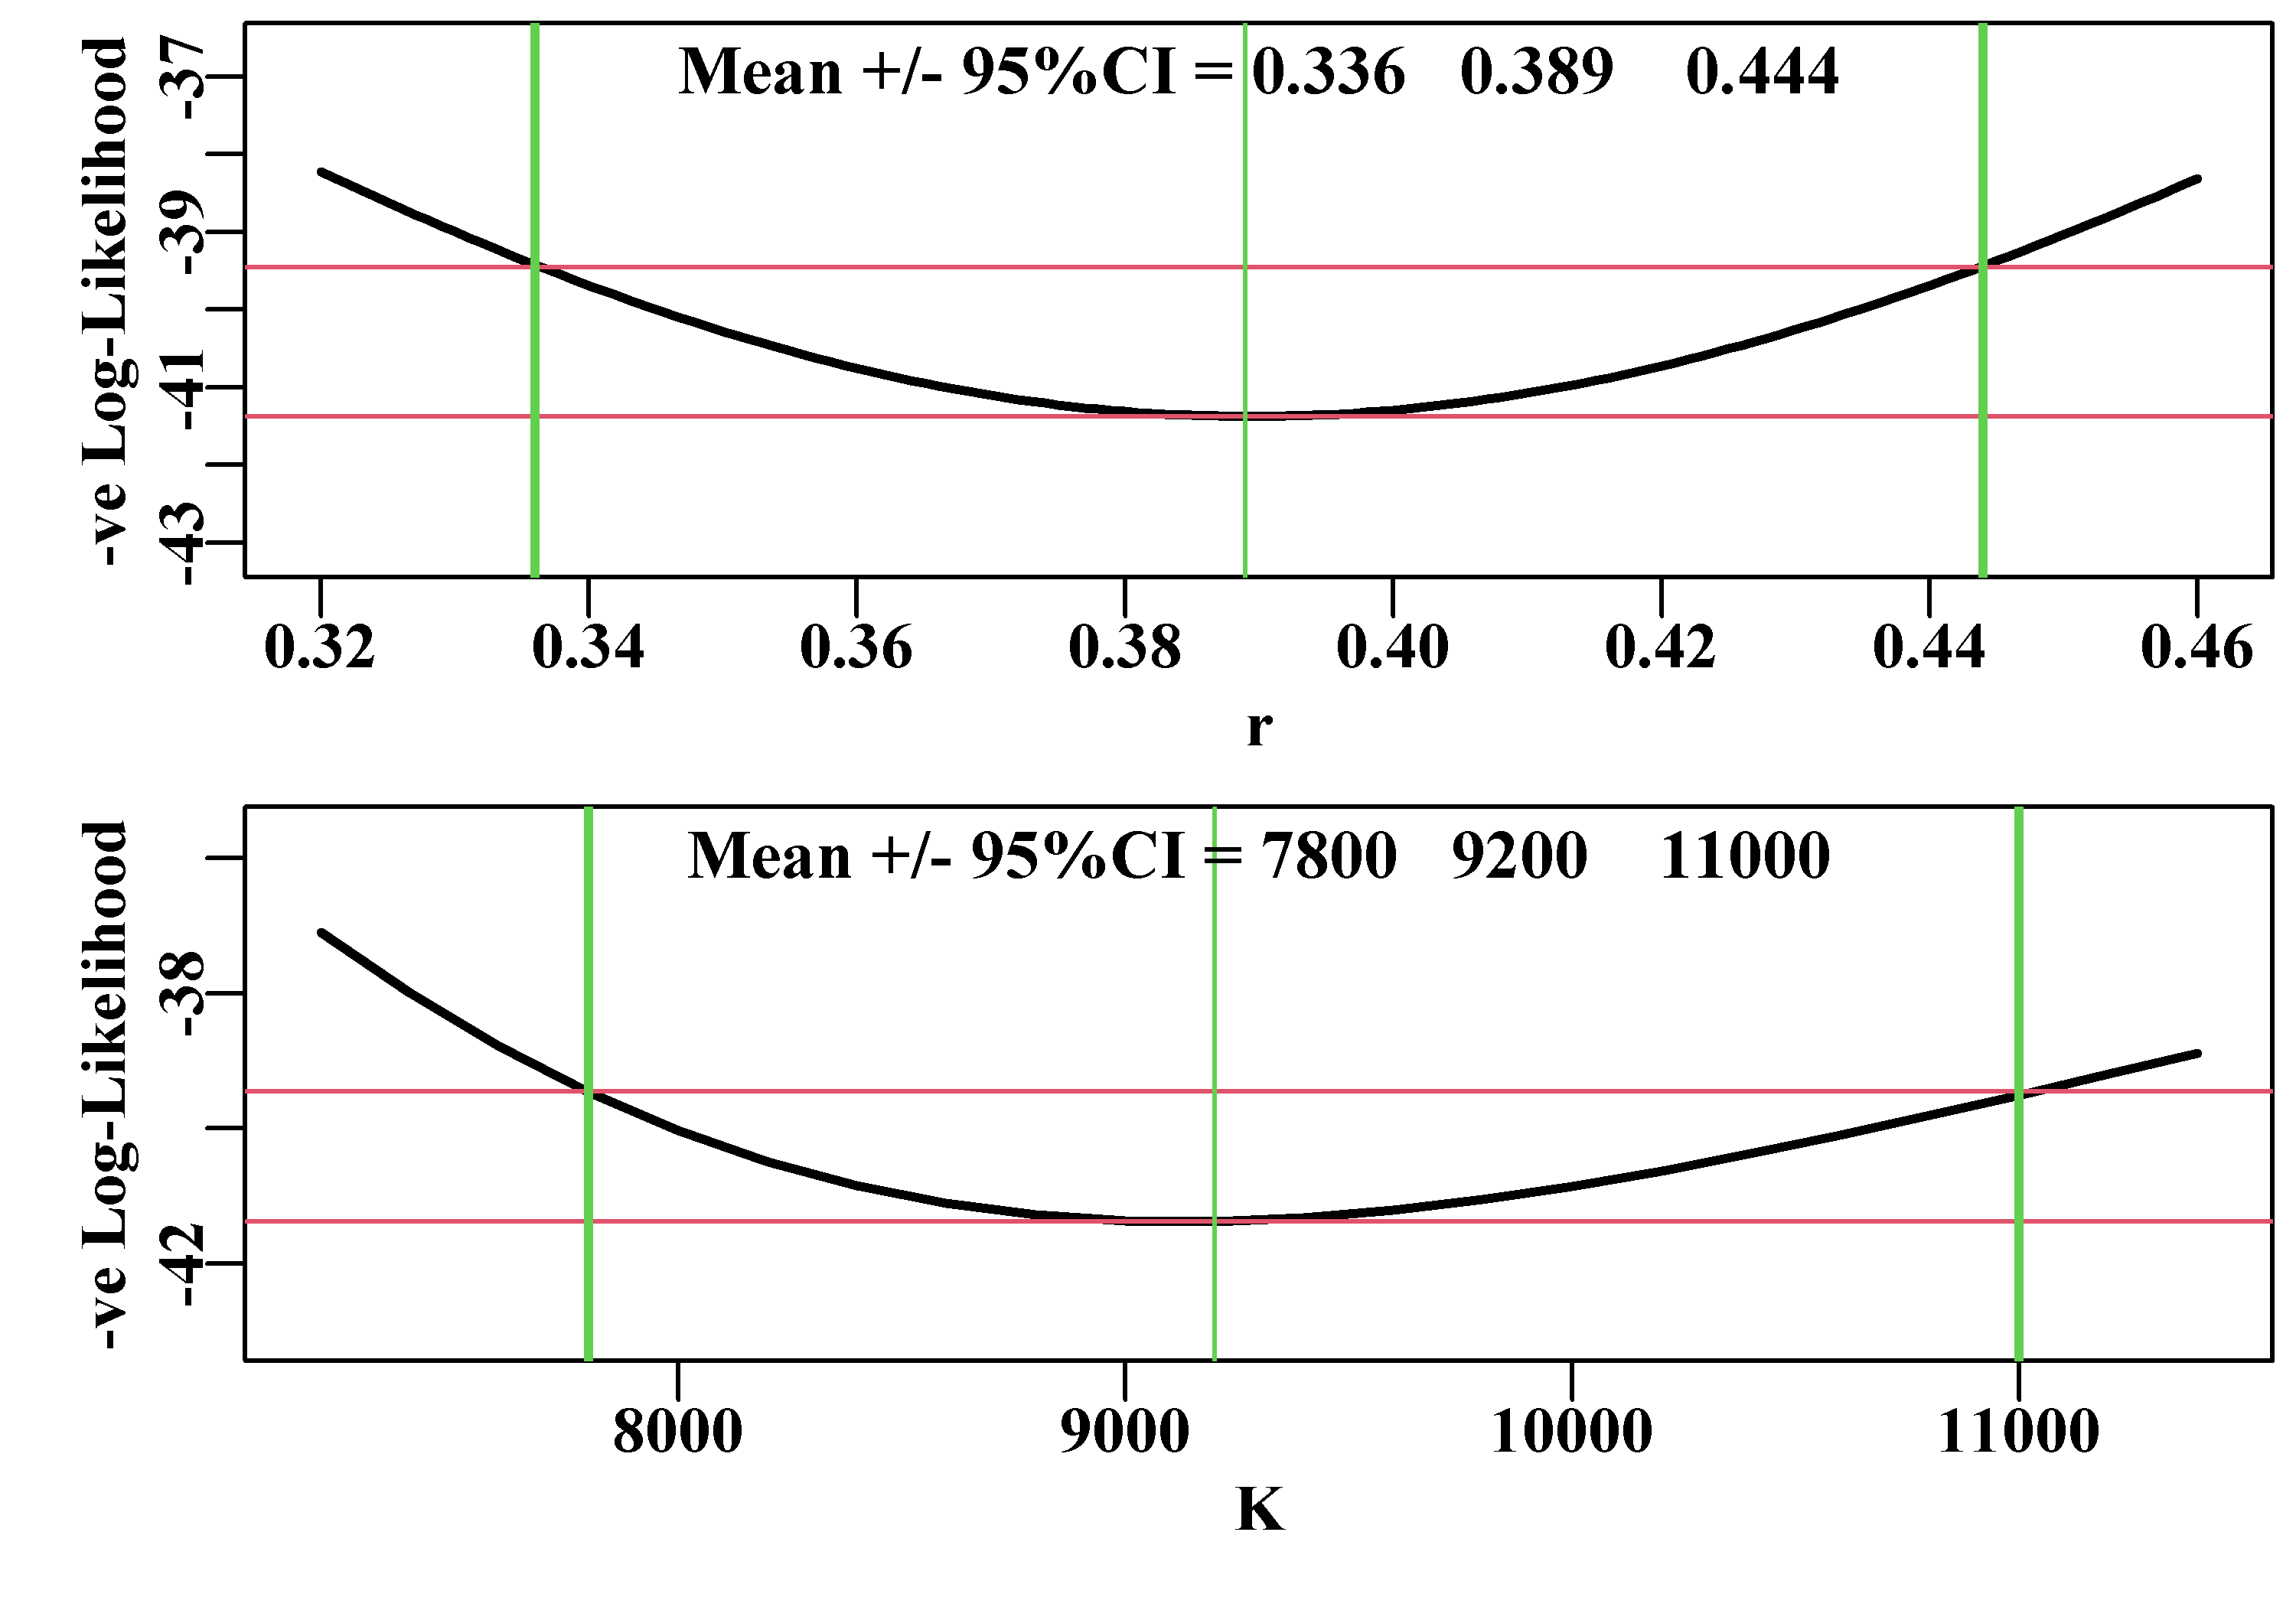 Likelihood profiles for both the r and K parameters of the Schaefer model fit to the abdat data-set. The horizontal red lines separate the minimum -veLL from the likelihood value bounding the 95% confidence intervals. The vertical green lines intersect the minimum and the 95% CI. The numbers are the 95% CI surrounding the mean optimum value.